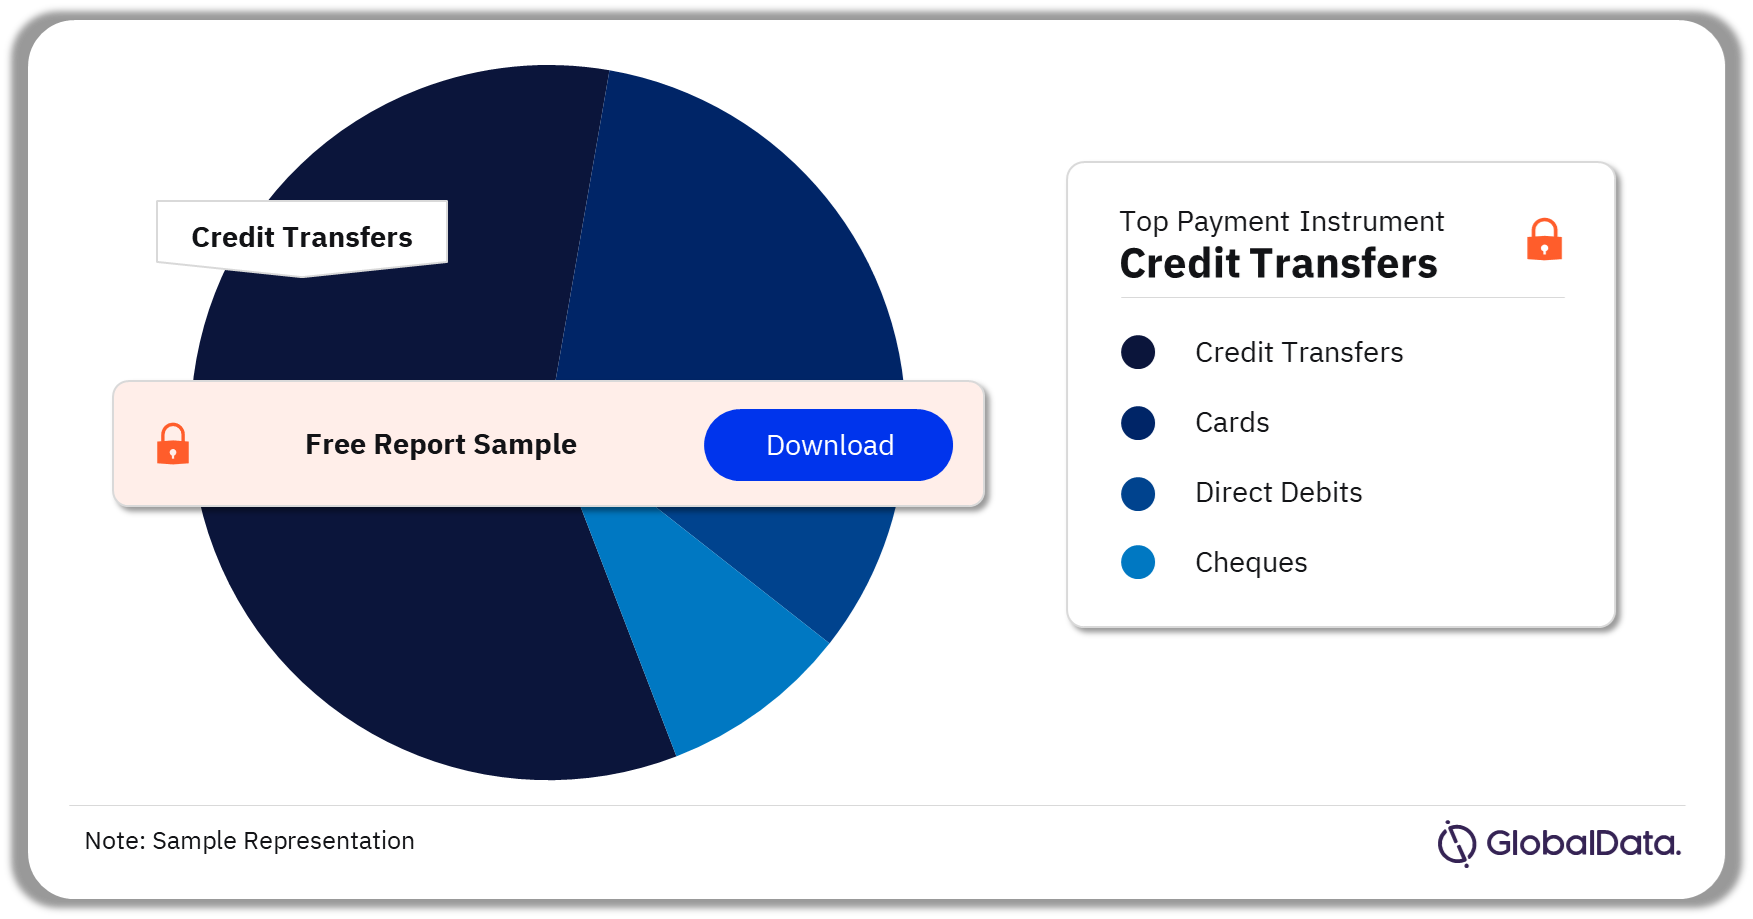 Israel Cards and Payments Market Analysis by Payment Instruments, 2023 (%)